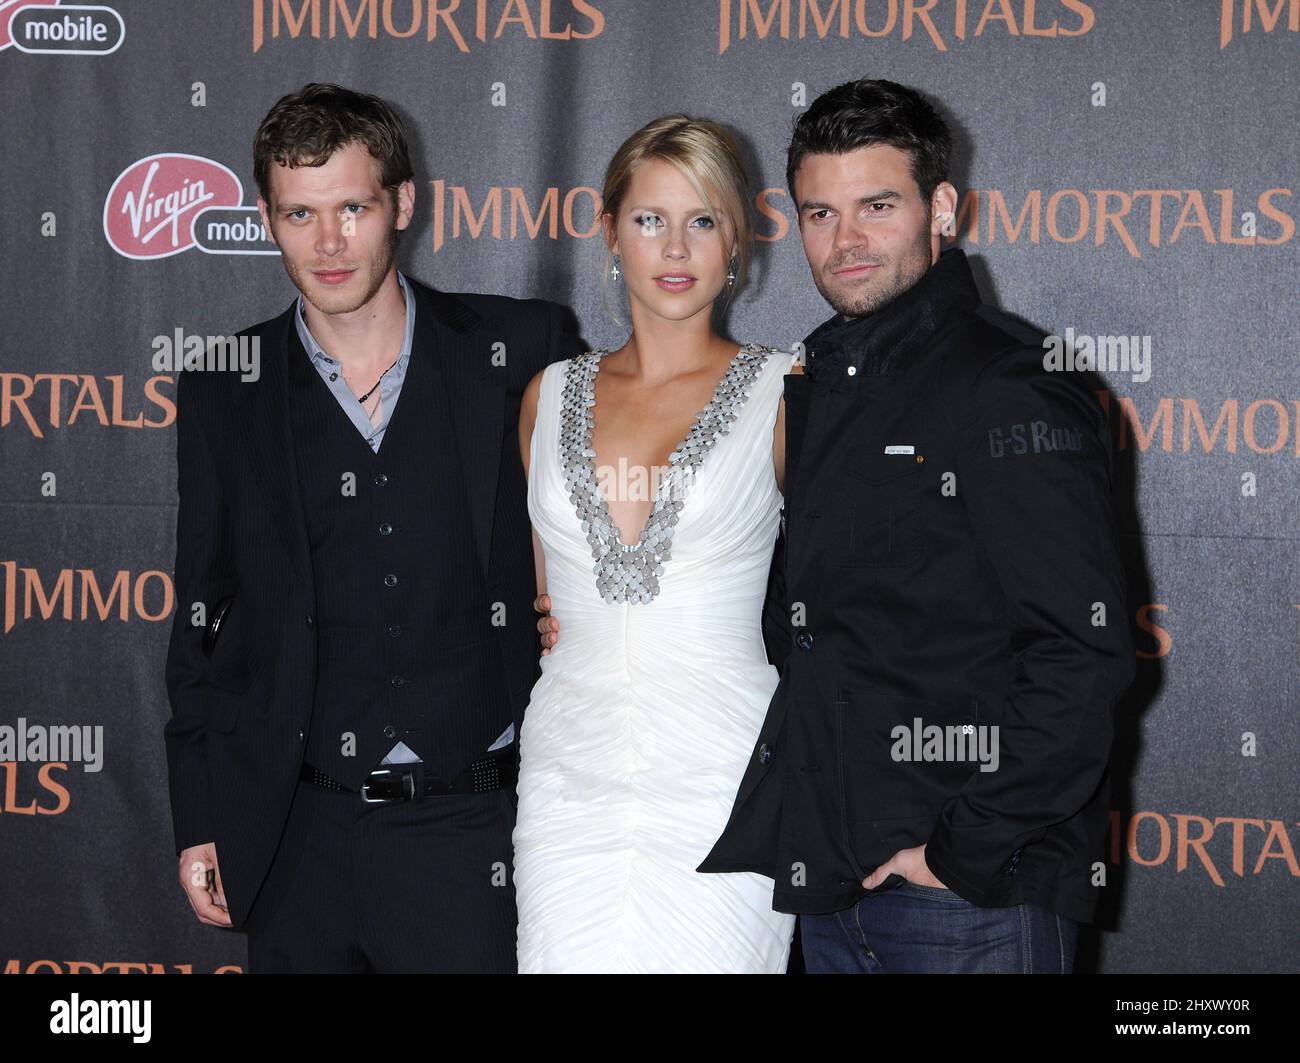 Joseph Morgan, Claire Holt and Daniel Gillies during The Immortals premiere held at the Nokia Theater L.A. Live, Los Angeles. Stock Photo